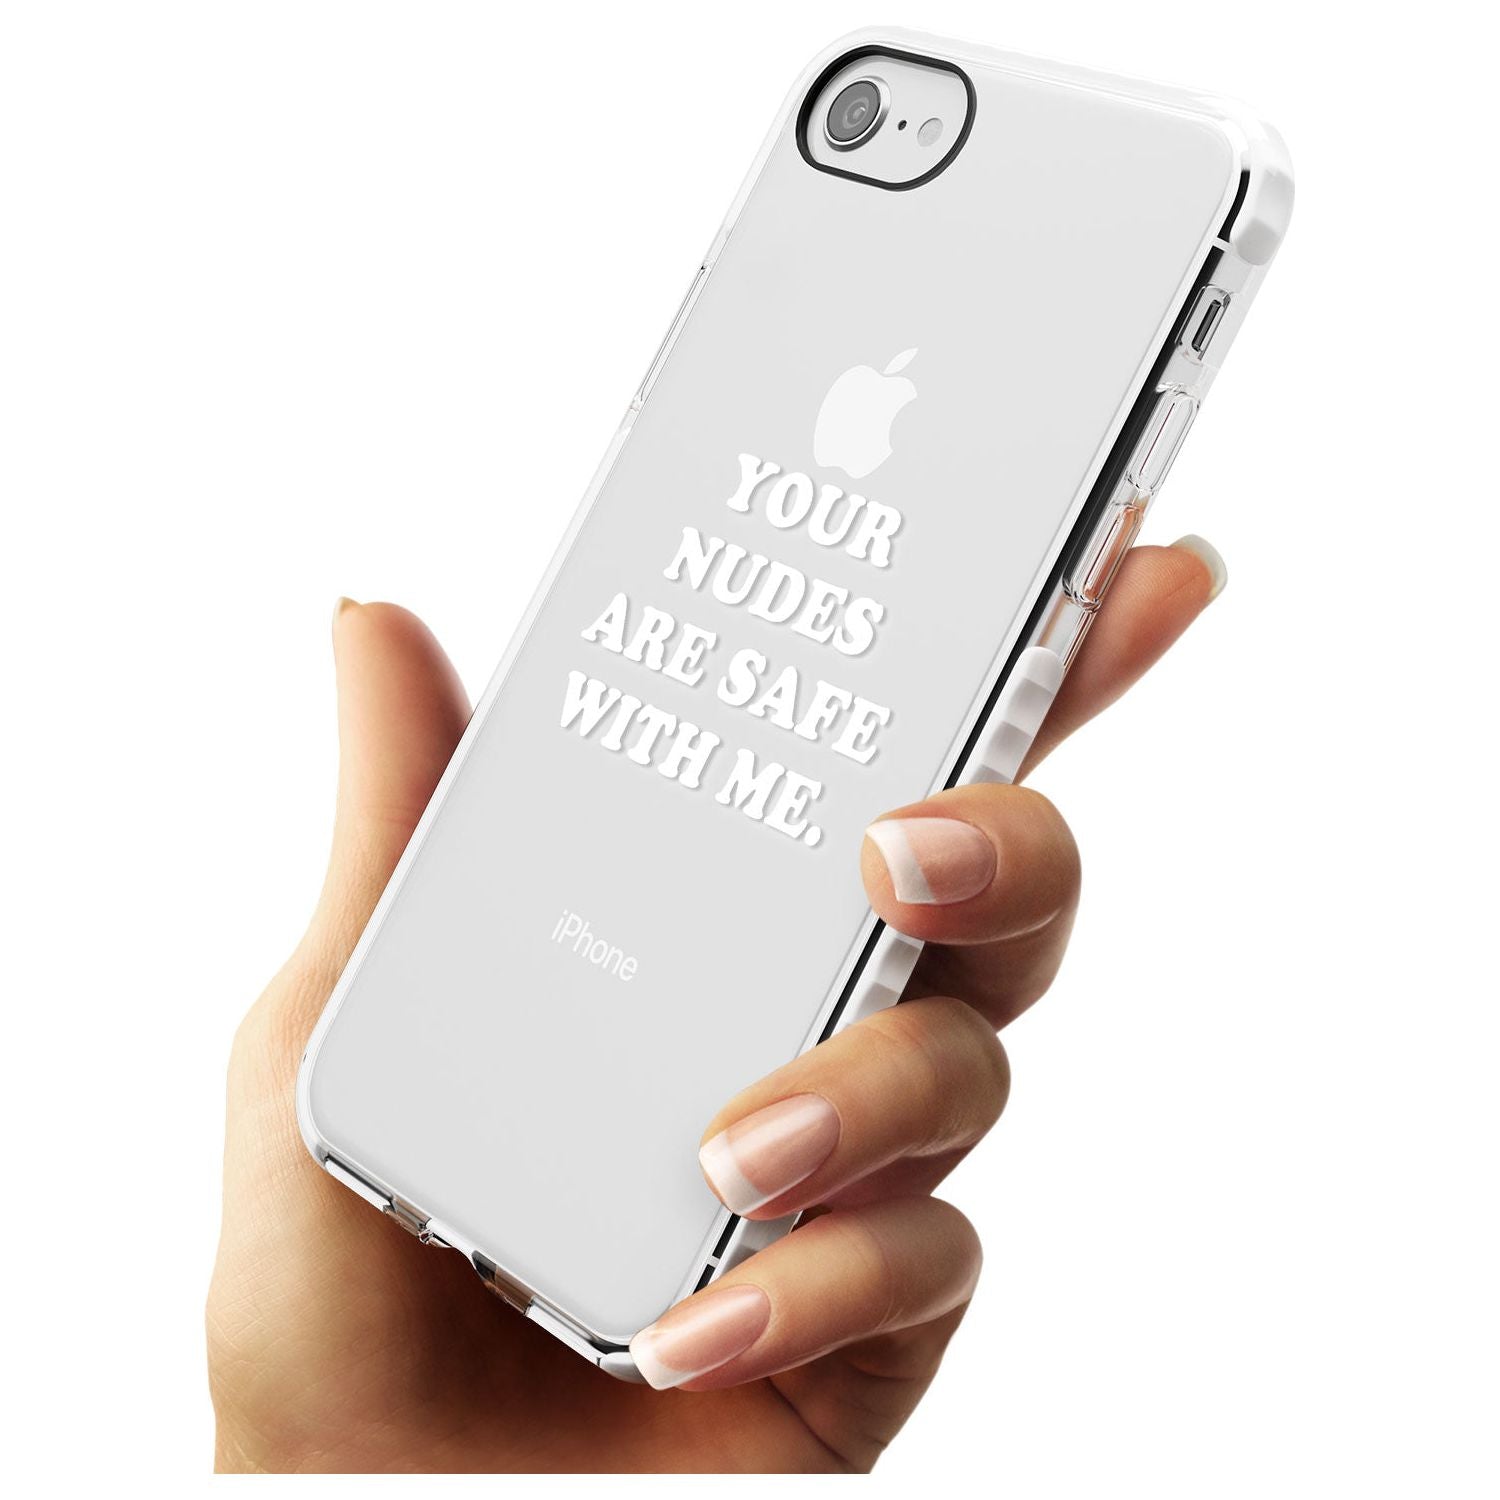 Your nudes are safe with me... WHITE Impact Phone Case for iPhone SE 8 7 Plus